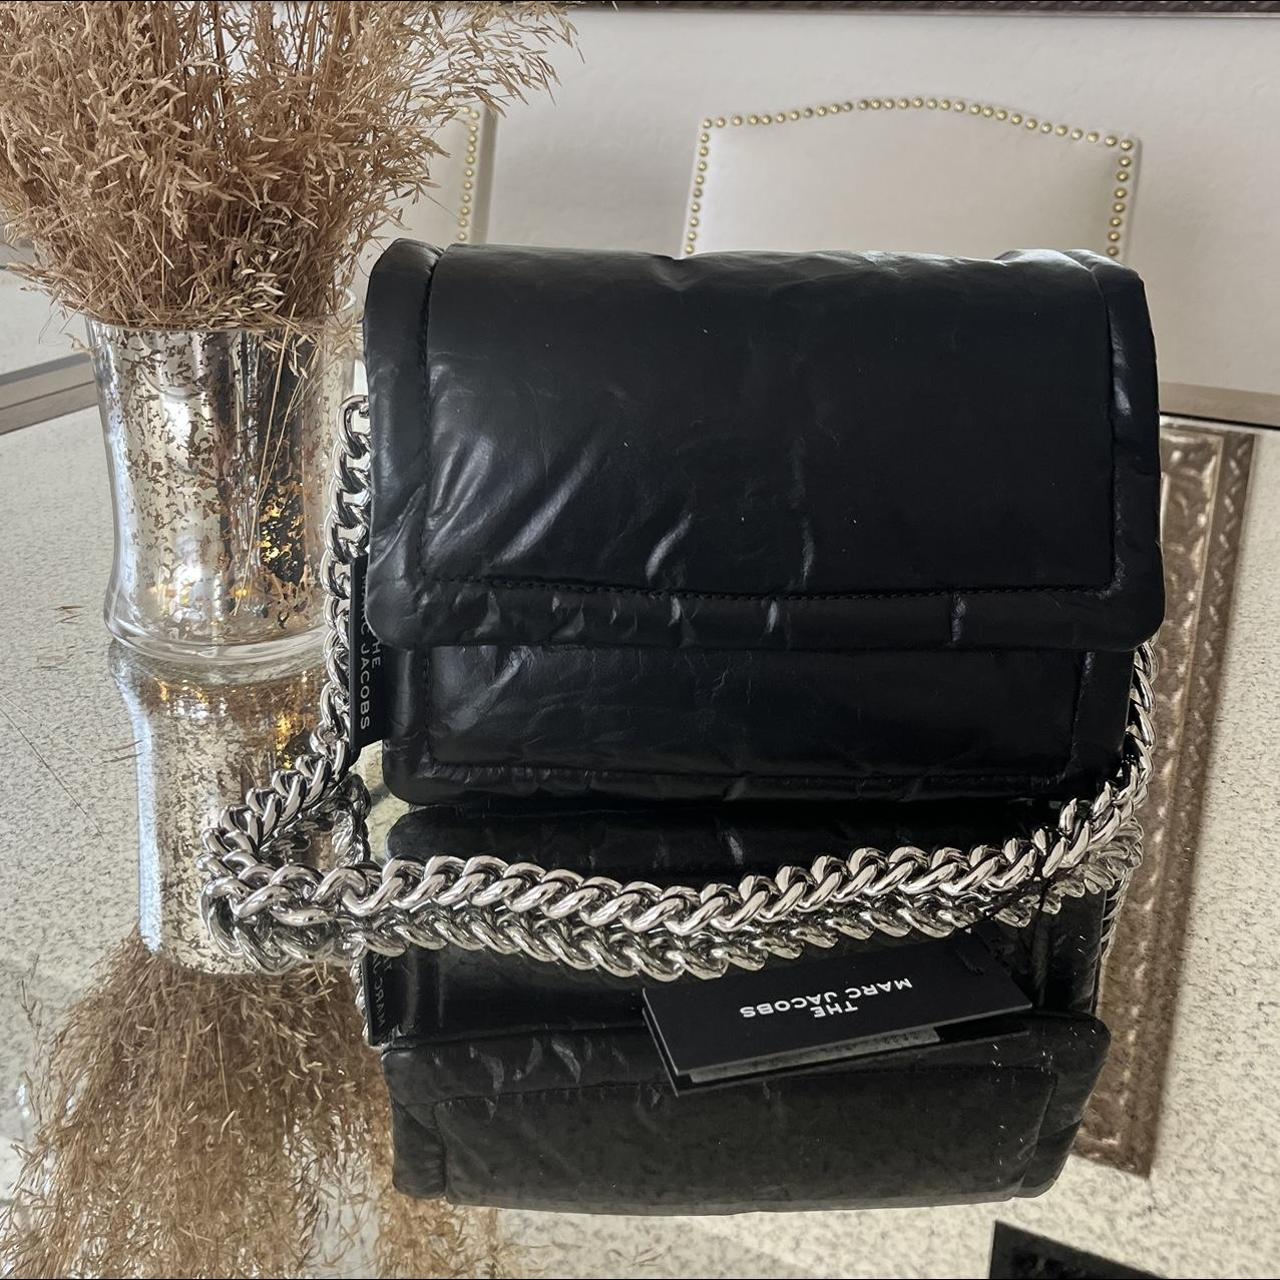 Marc Jacobs Black and Pink Pillow Bag with Silver - Depop